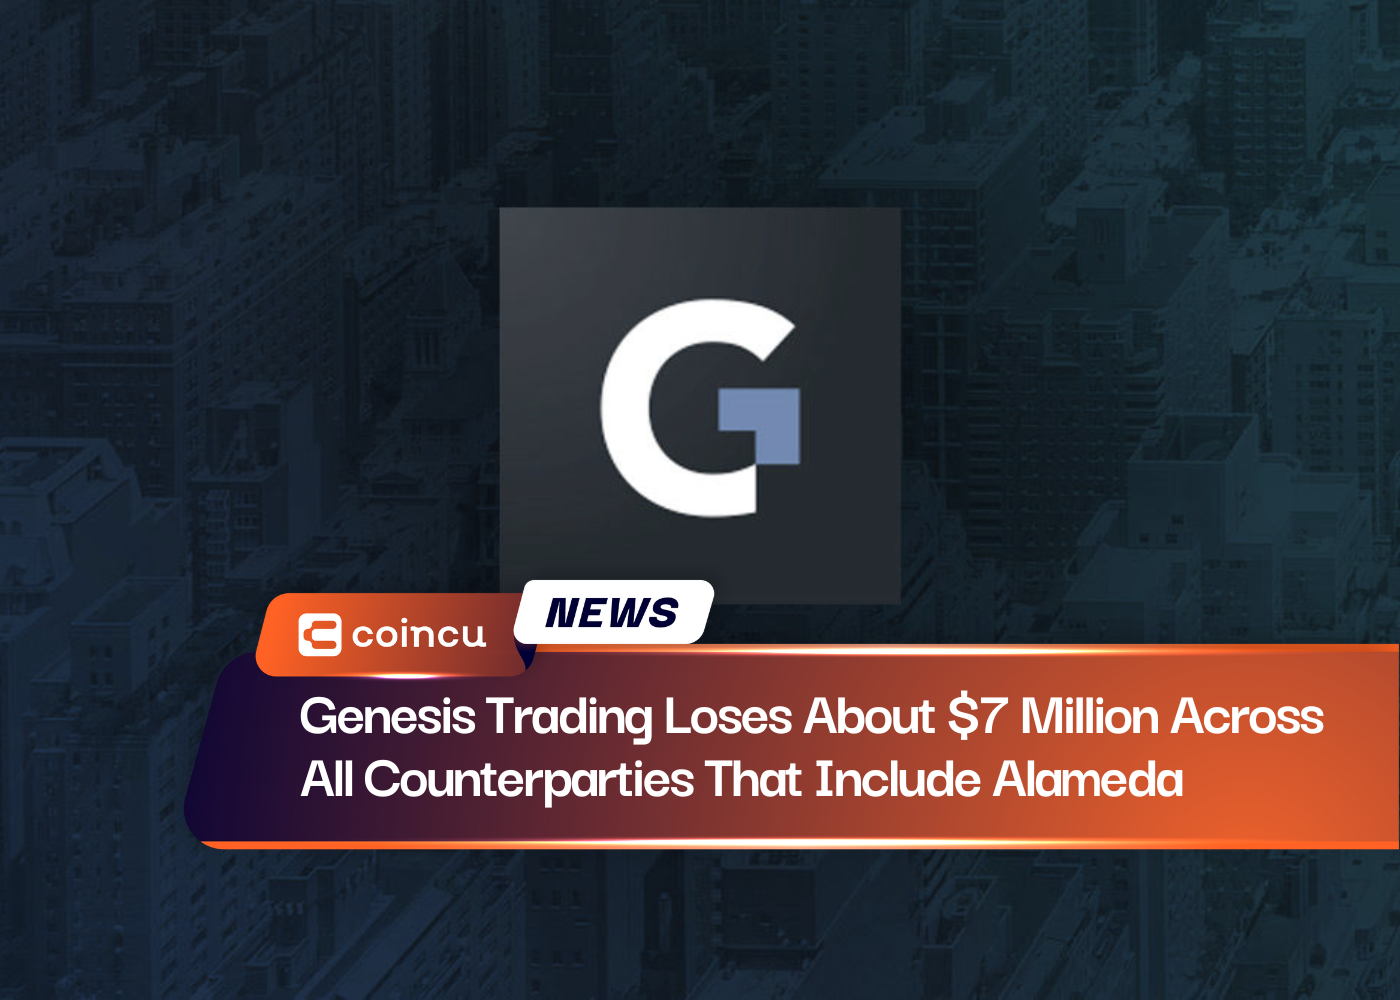 Genesis Trading Loses About $7 Million Across All Counterparties That Include Alameda